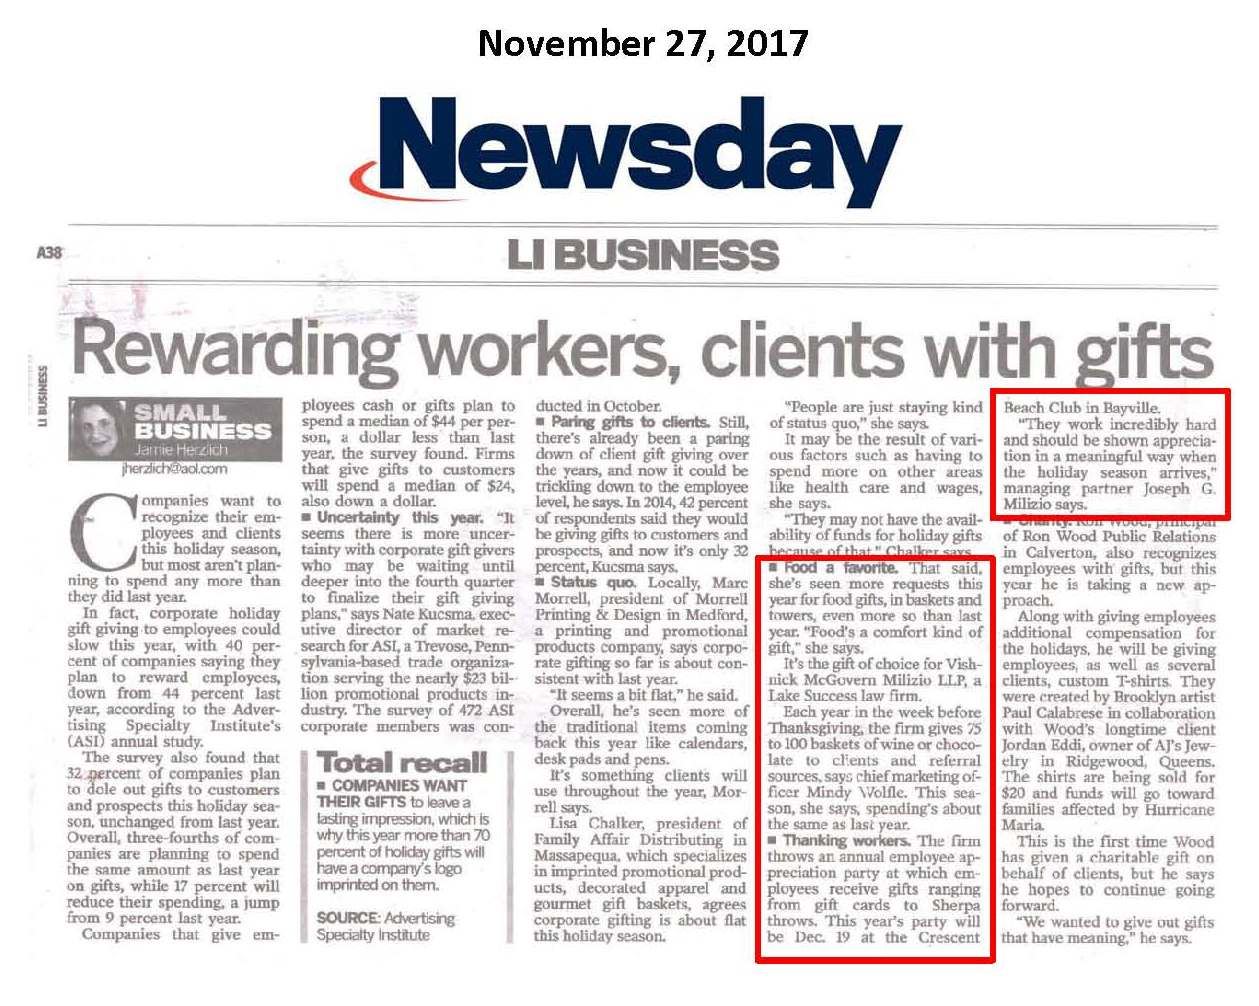 Newsday: Rewarding Workers, Clients with Gifts